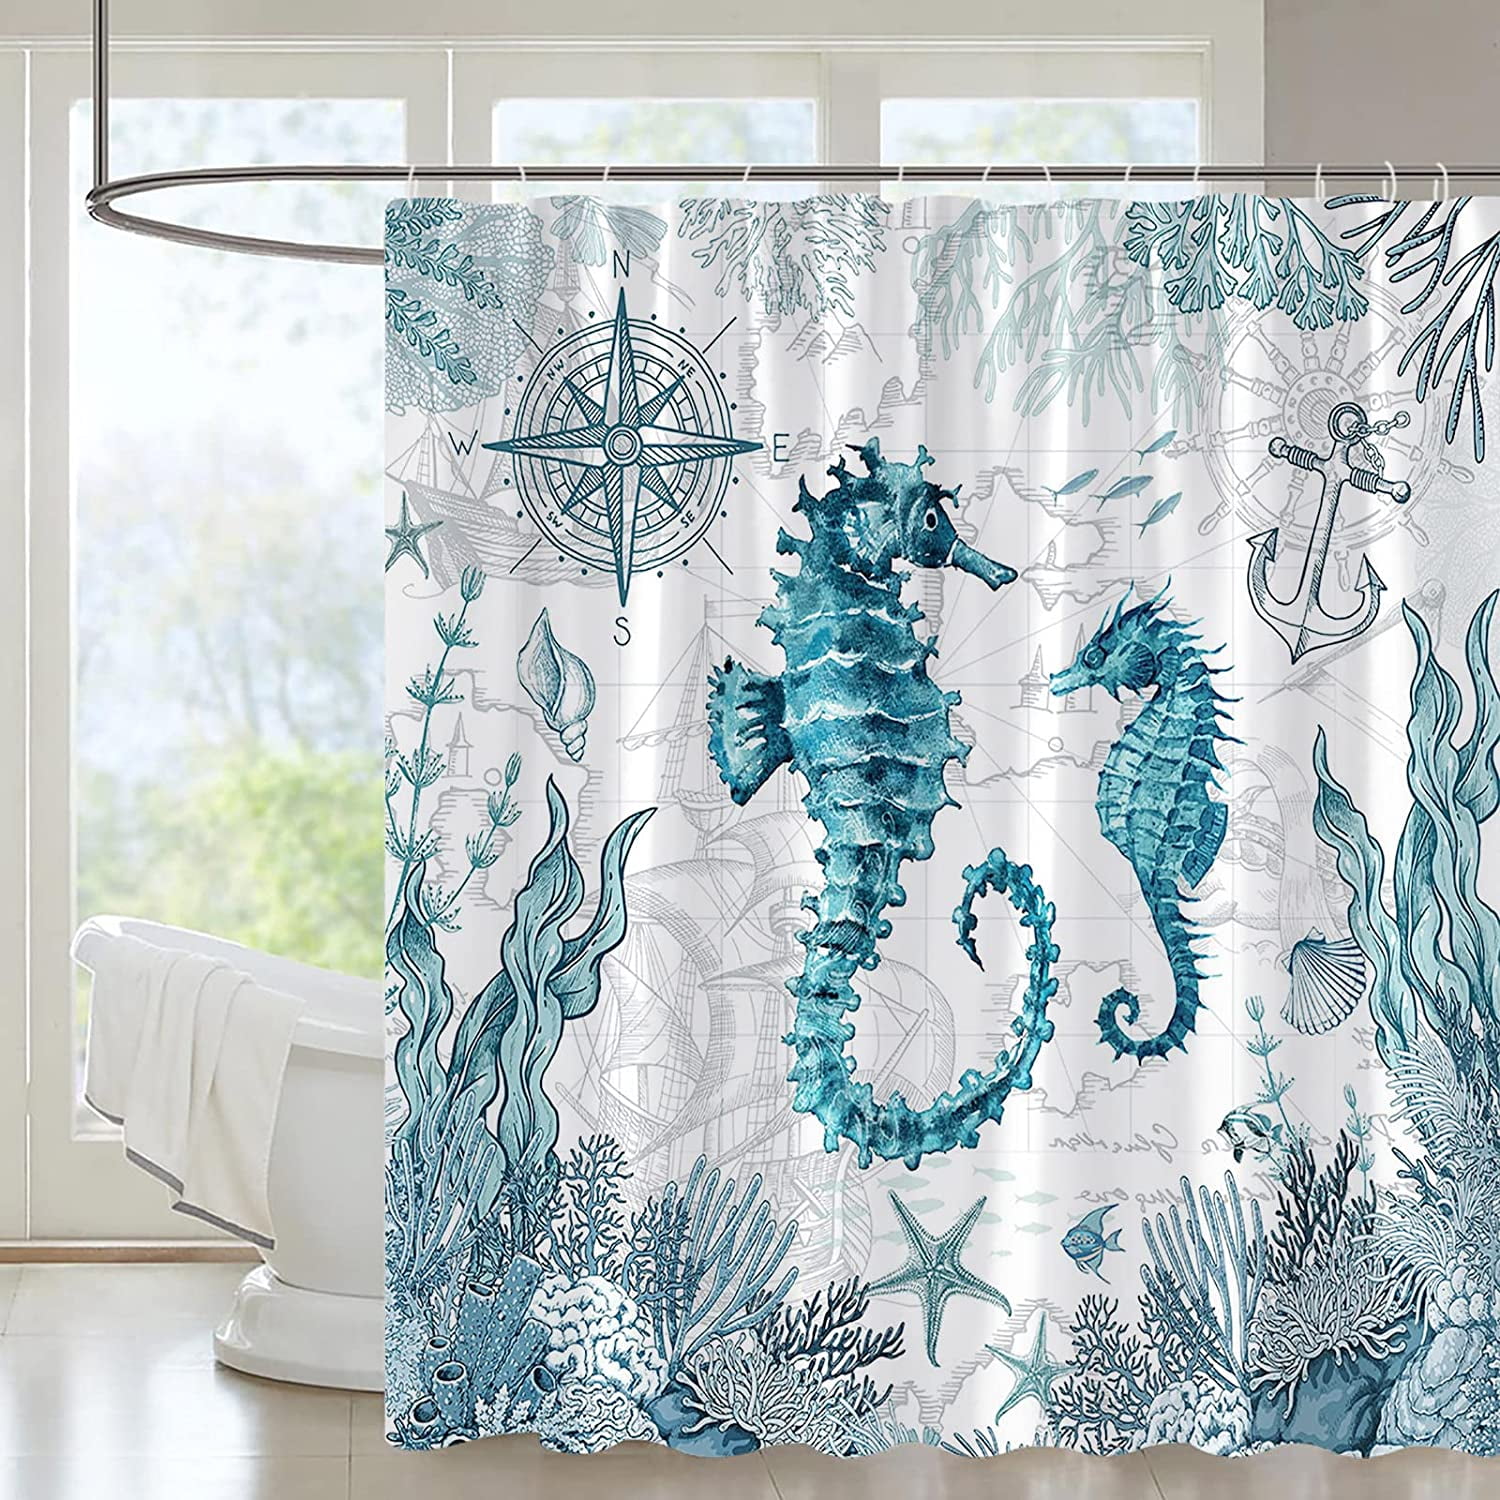 Curtain Of Sea Shells For Decoration Relaxing Ecology Recreation